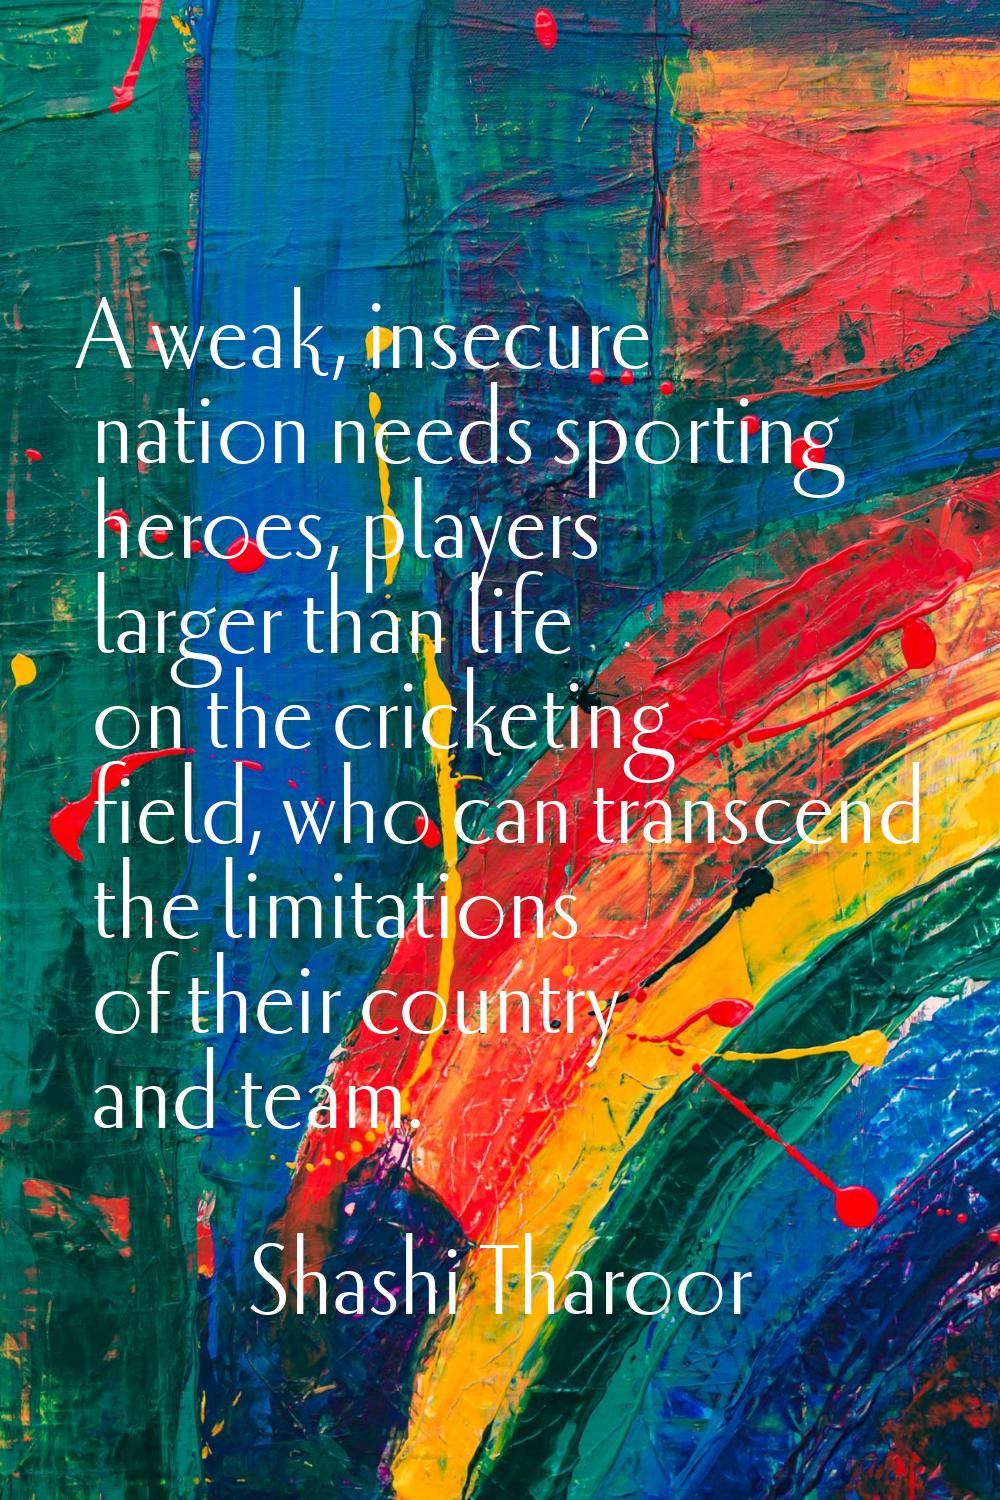 A weak, insecure nation needs sporting heroes, players larger than life on the cricketing field, wh